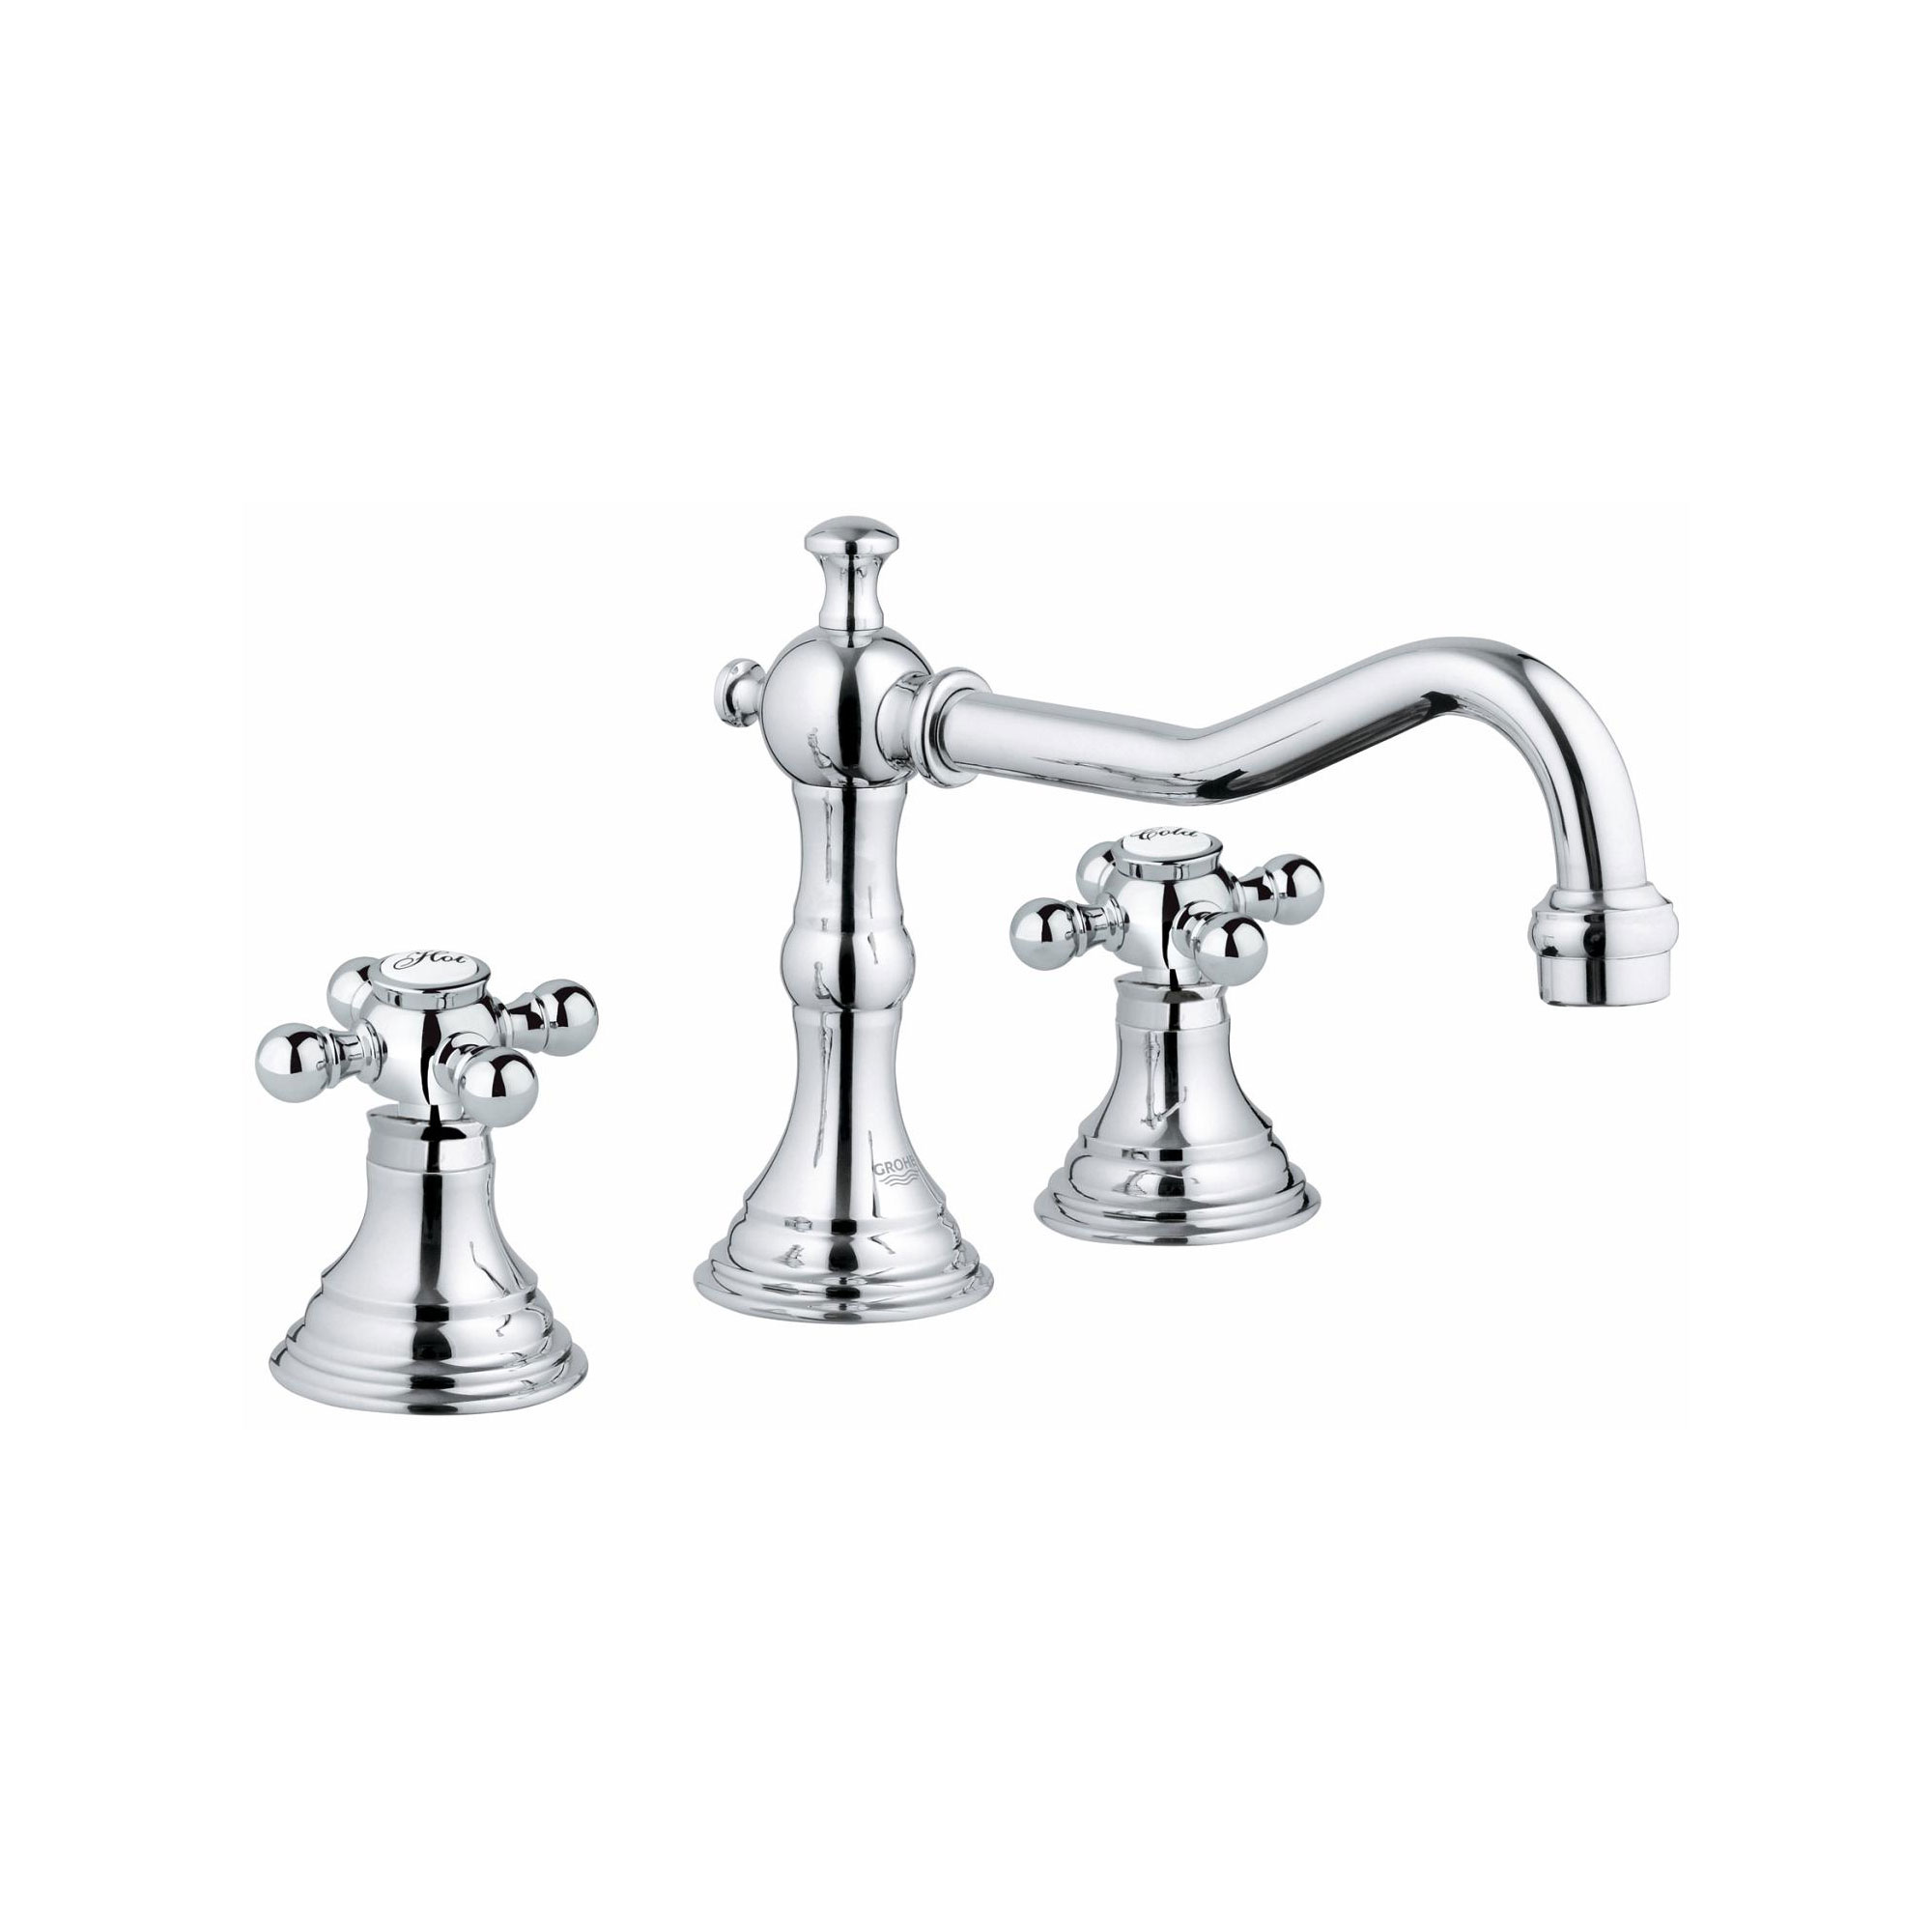 8-inch Widespread 2-Handle S-Size Bathroom Faucet 1.5 GPM